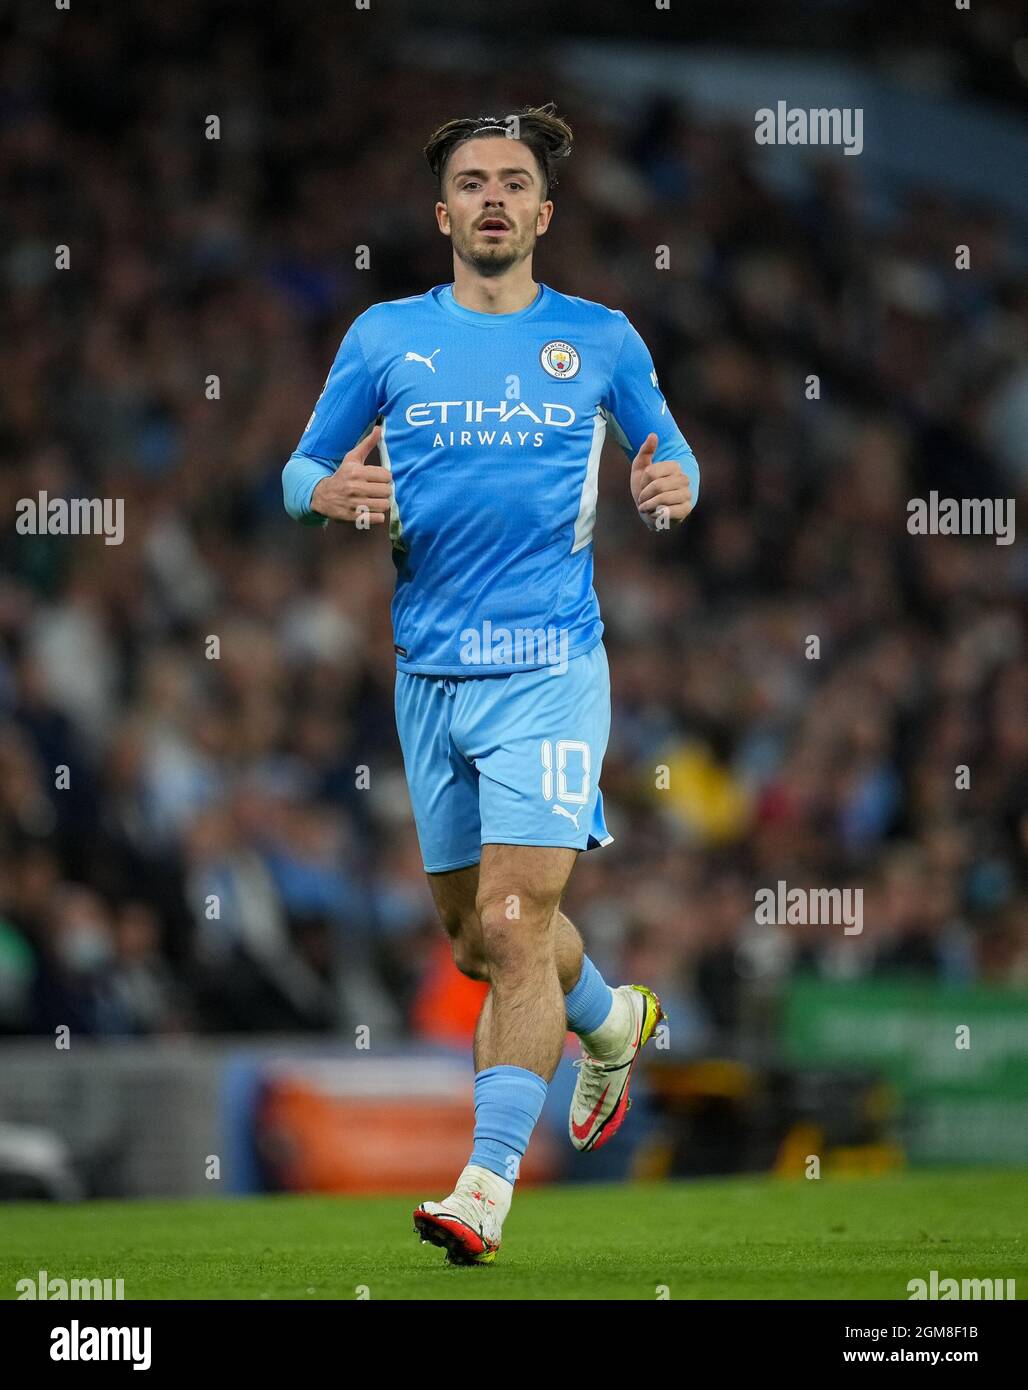 Manchester, UK. 15th Sep, 2021. Jack Grealish of Man City during the UEFA Champions  League group match between Manchester City and RB Leipzig at the Etihad  Stadium, Manchester, England on 15 September